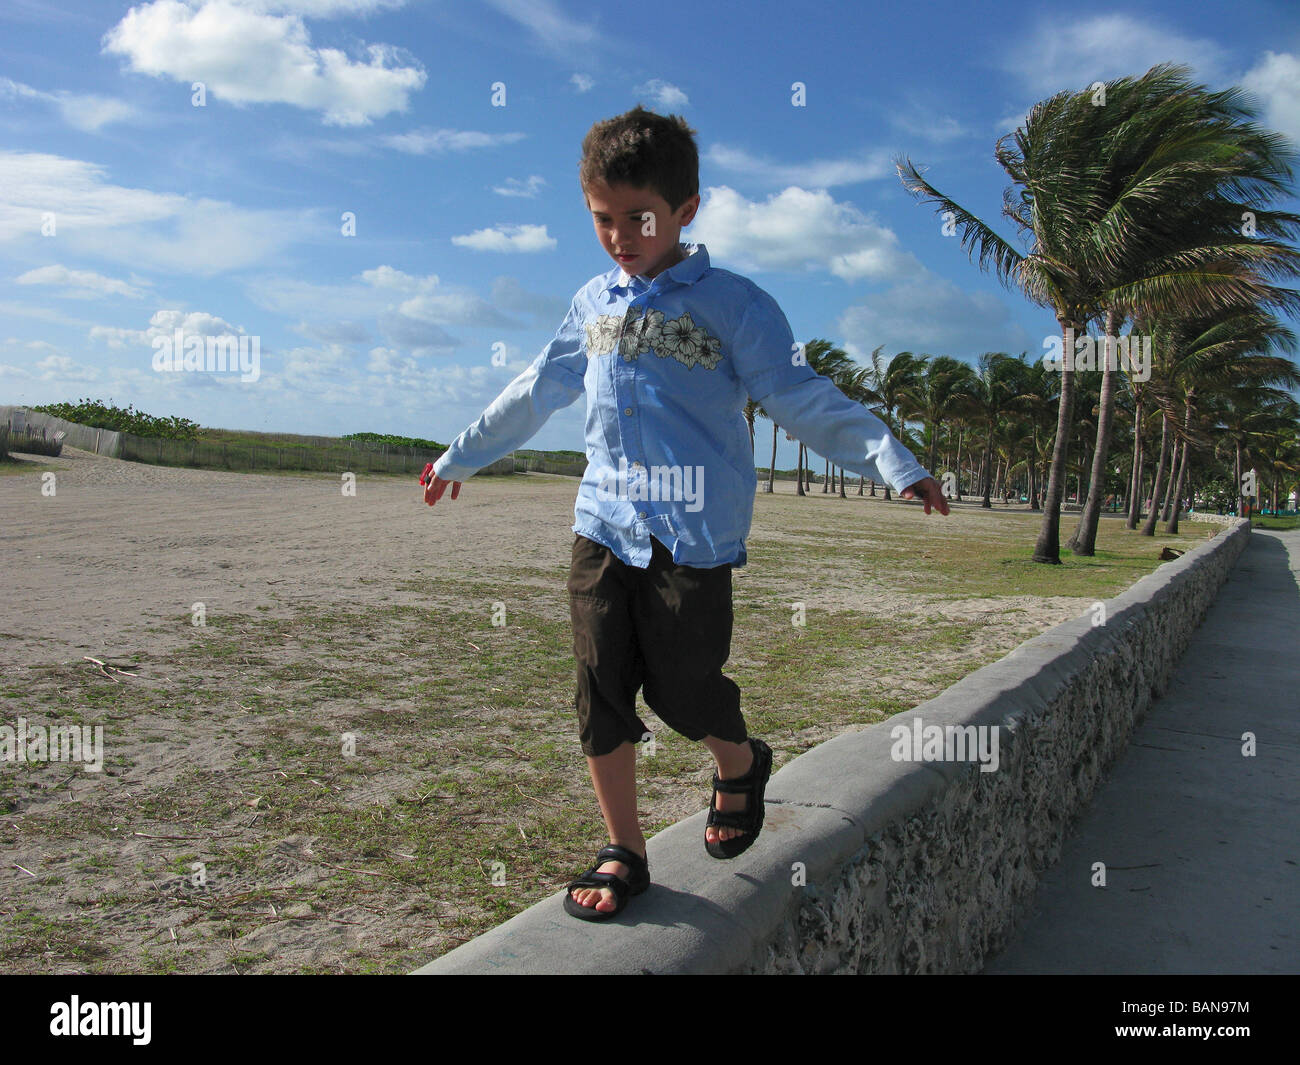 A young boy walking on a wall at the beach. Stock Photo